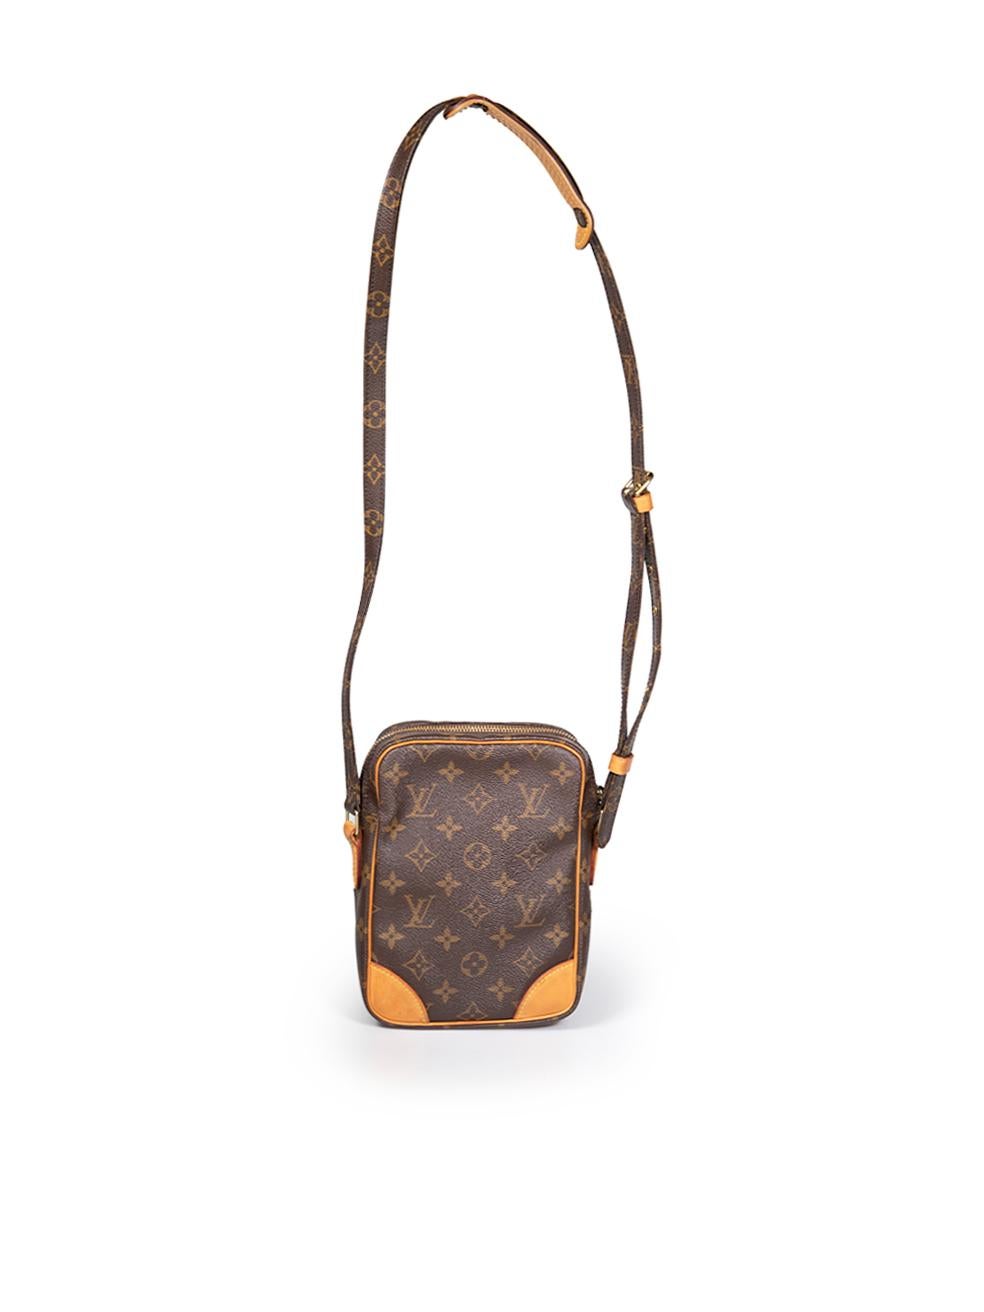 Louis Vuitton 2000 Brown Monogram Amazon Messenger Bag In Good Condition For Sale In London, GB